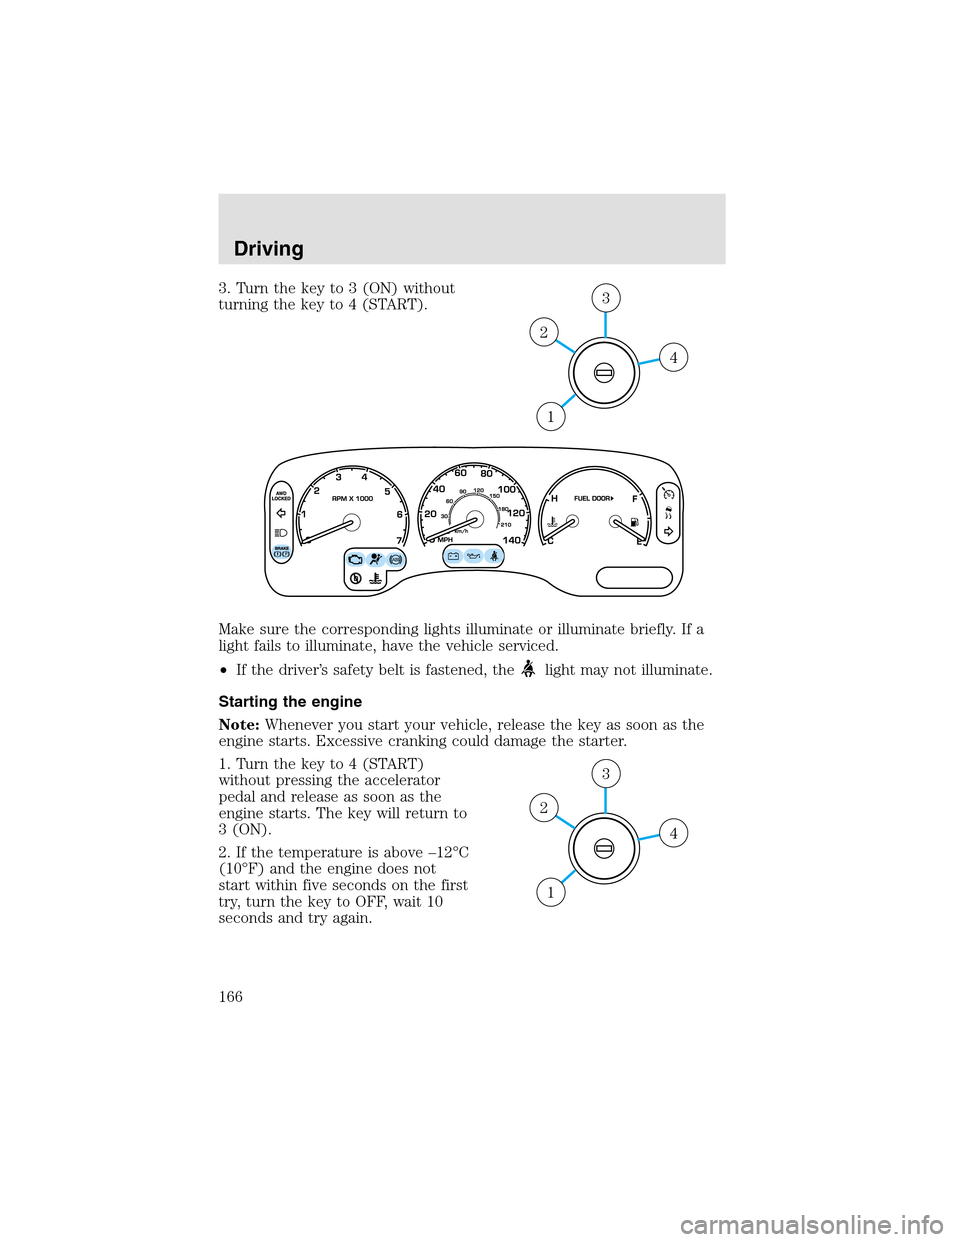 LINCOLN AVIATOR 2003 User Guide 3. Turn the key to 3 (ON) without
turning the key to 4 (START).
Make sure the corresponding lights illuminate or illuminate briefly. If a
light fails to illuminate, have the vehicle serviced.
•If th